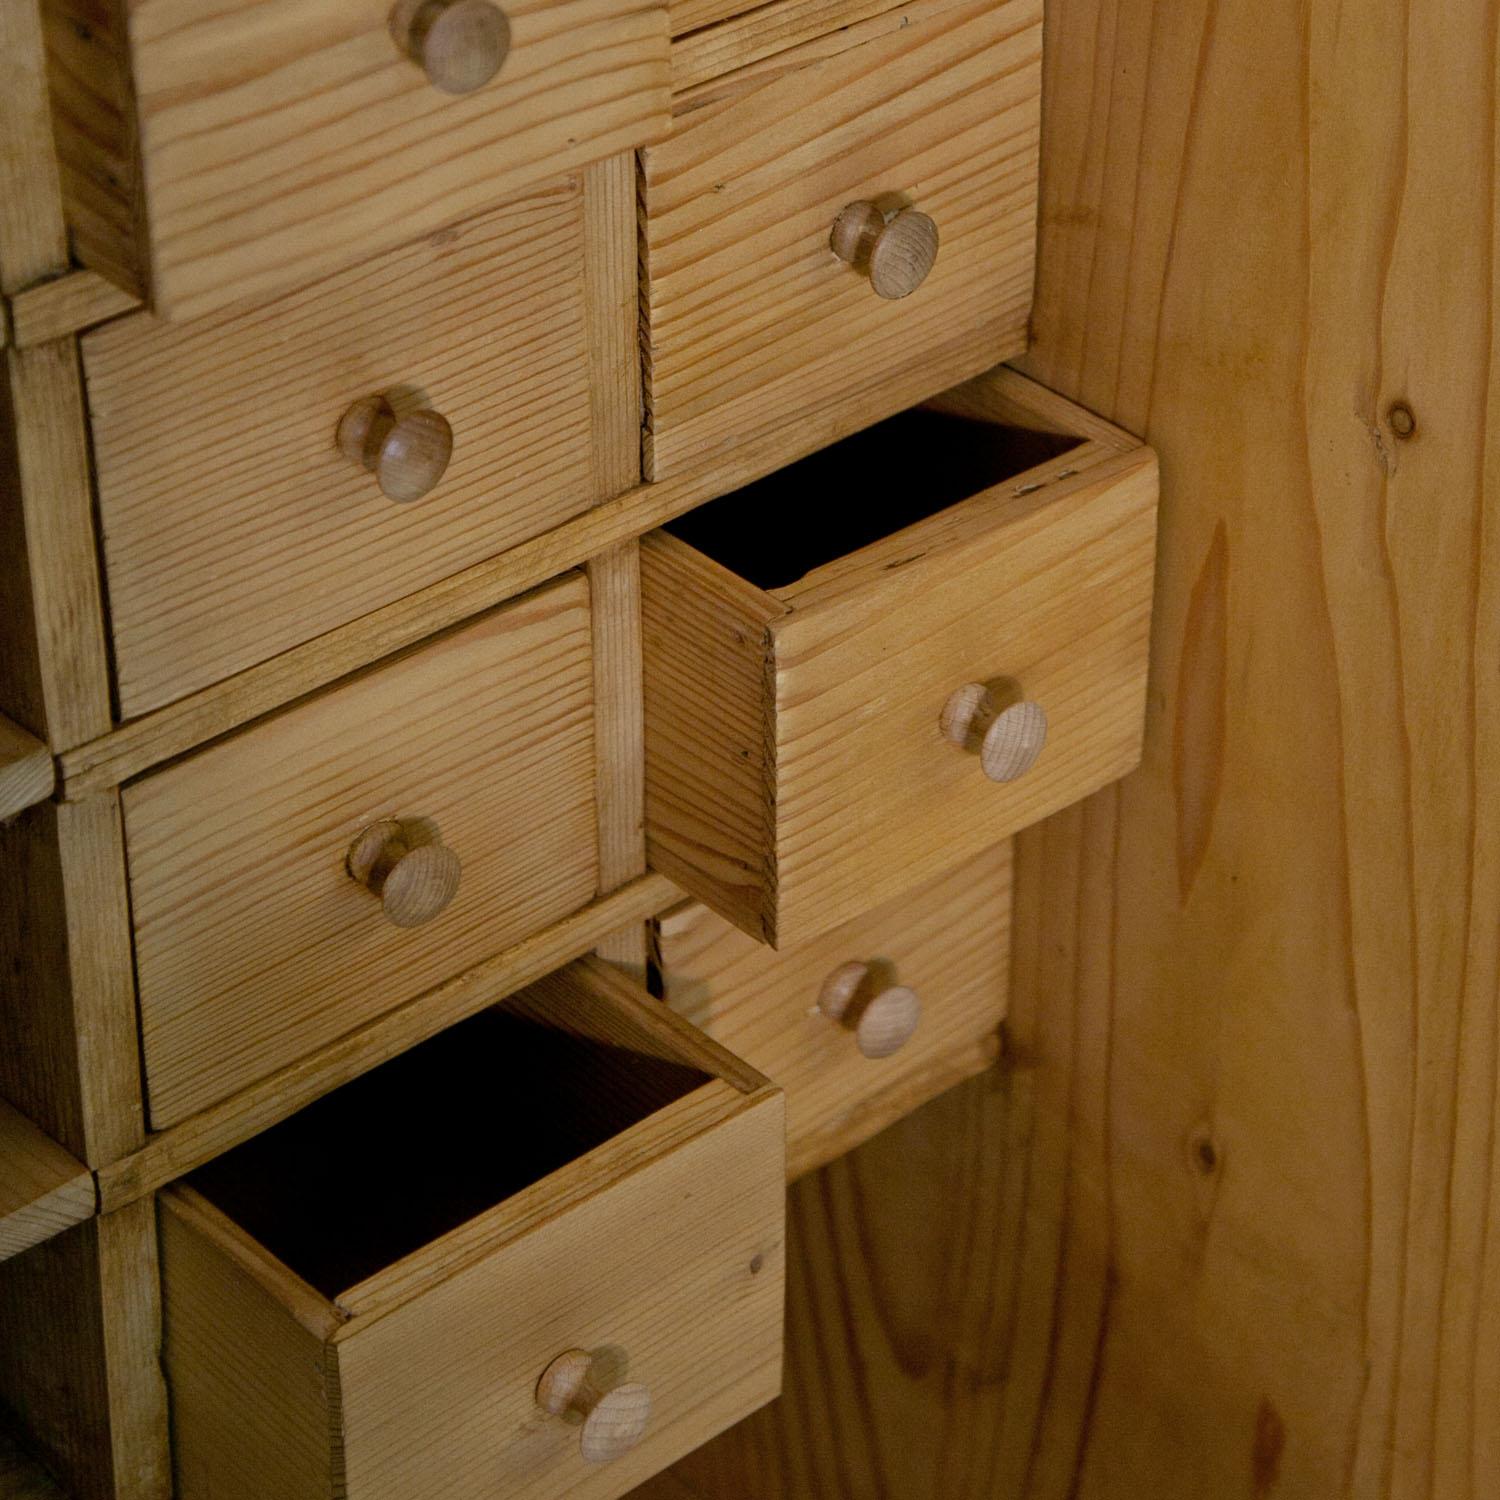 Small play shop for children out of softwood. The shop has display cases to the sides and several drawers and compartments.